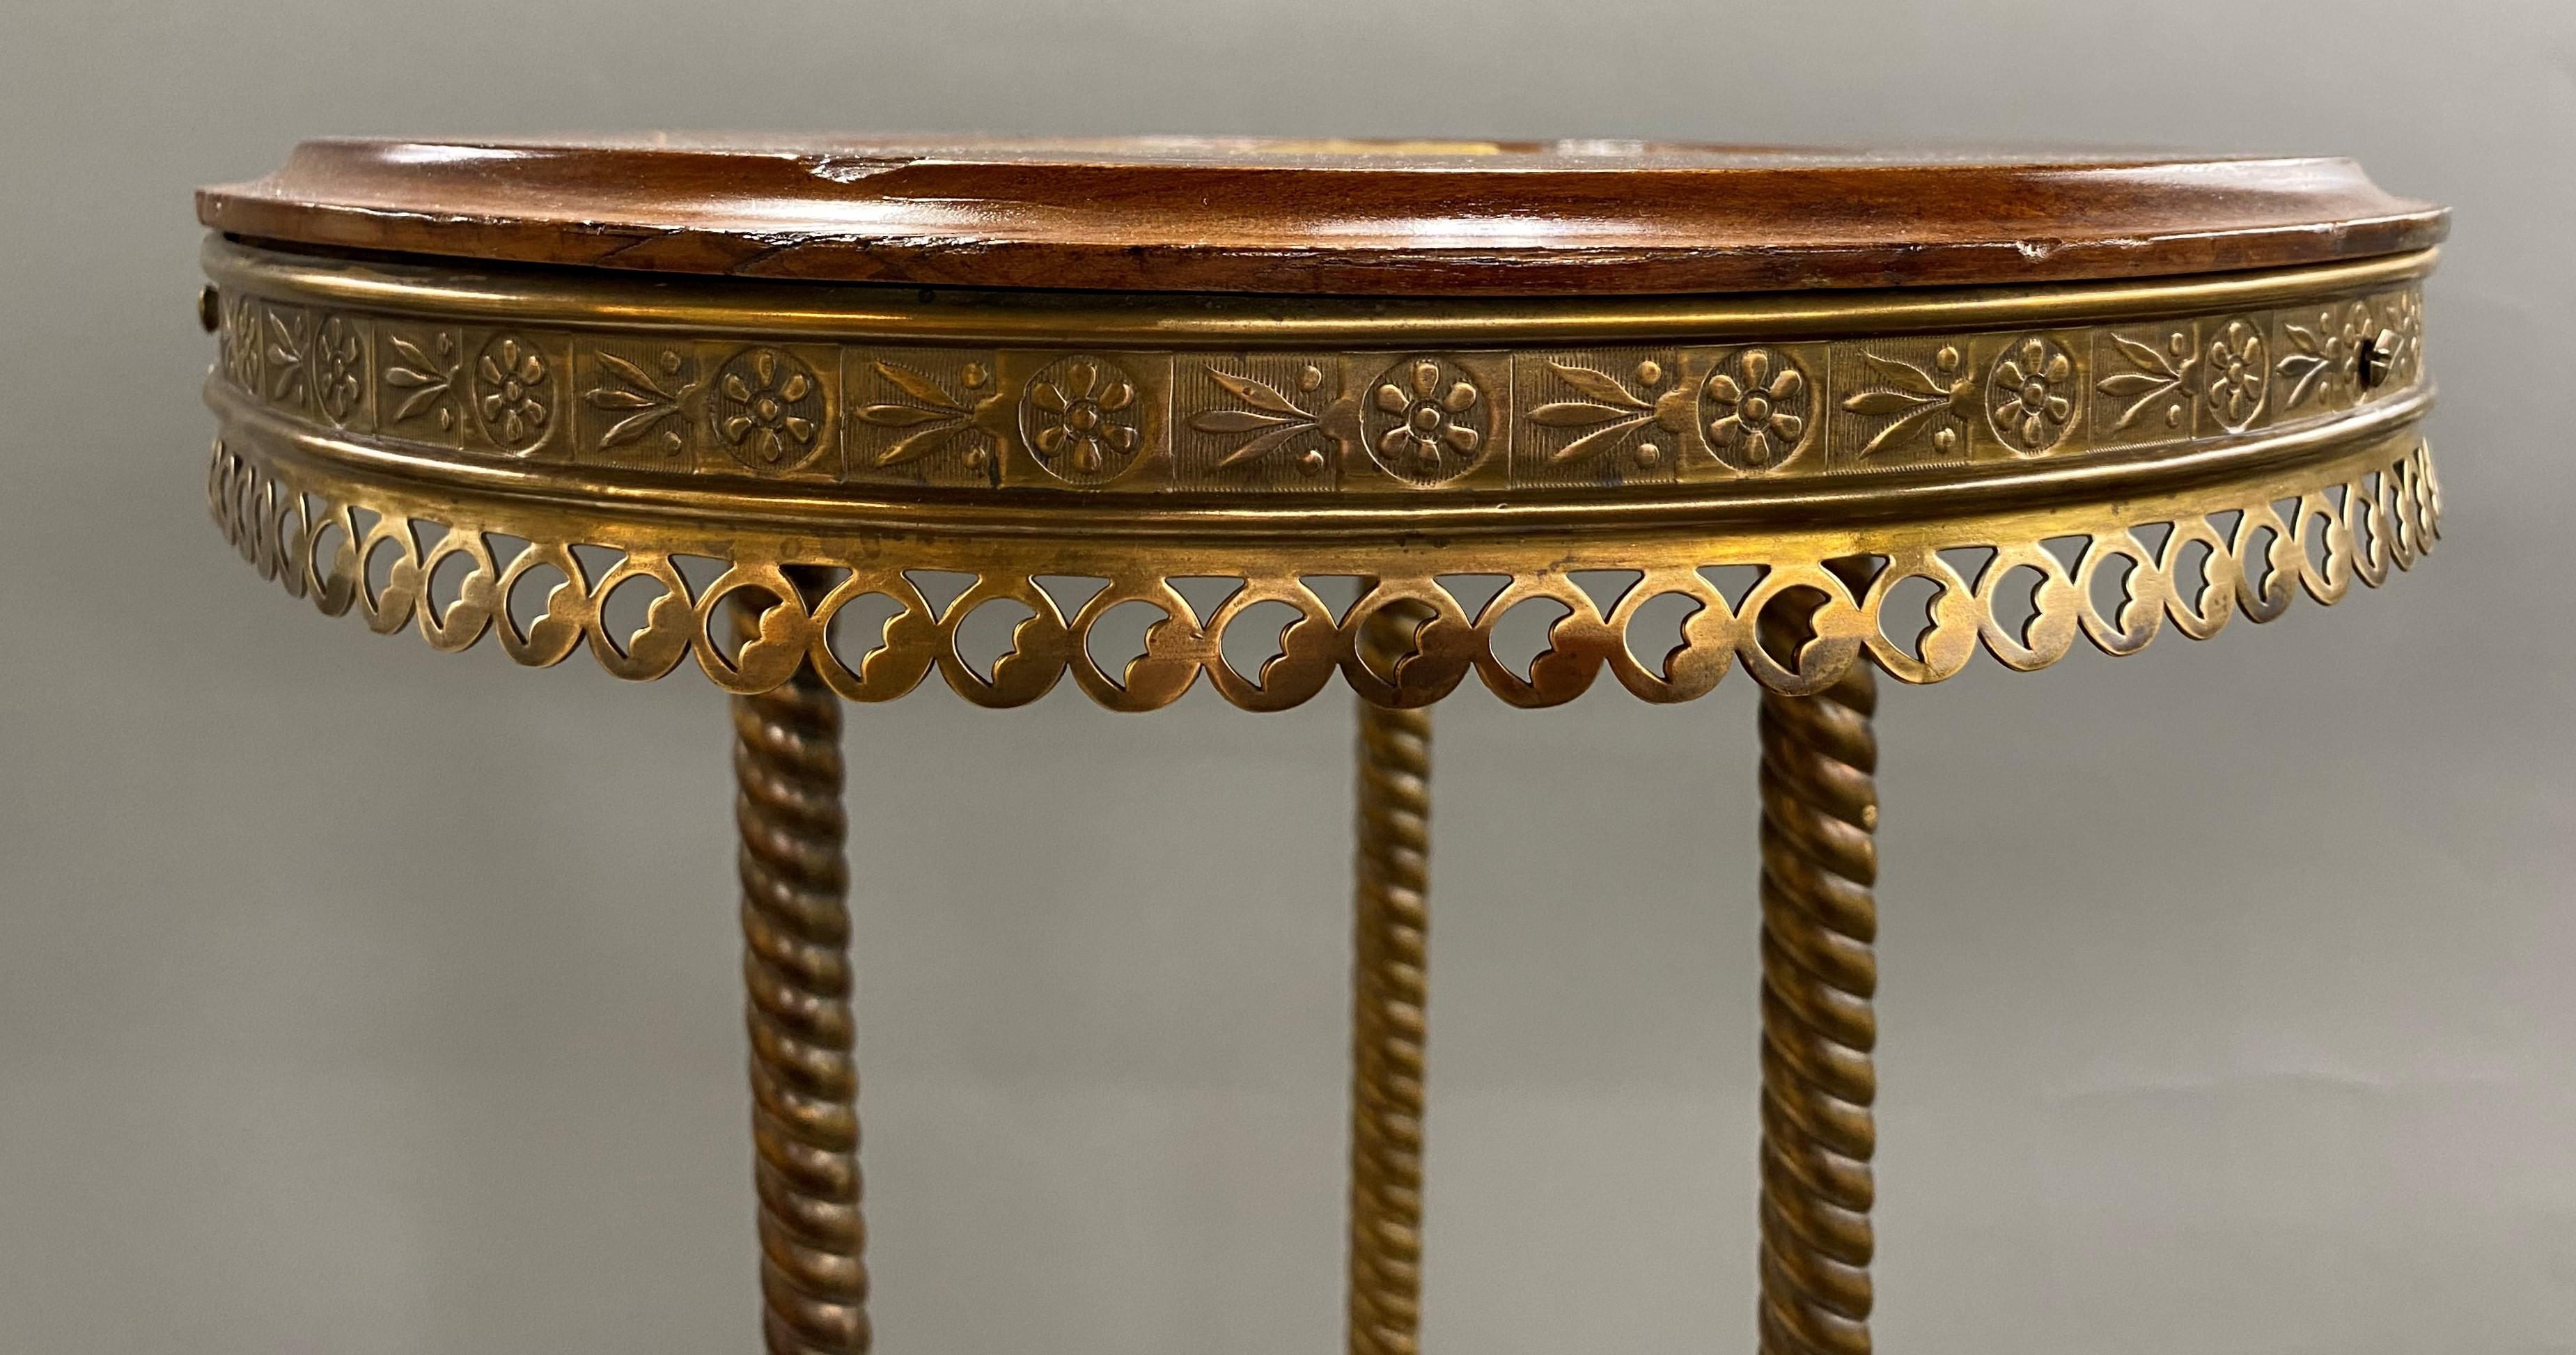 American J. & J.G. Low Chelsea Tile Wooden and Brass Pedestal or Tripod Stand, circa 1884